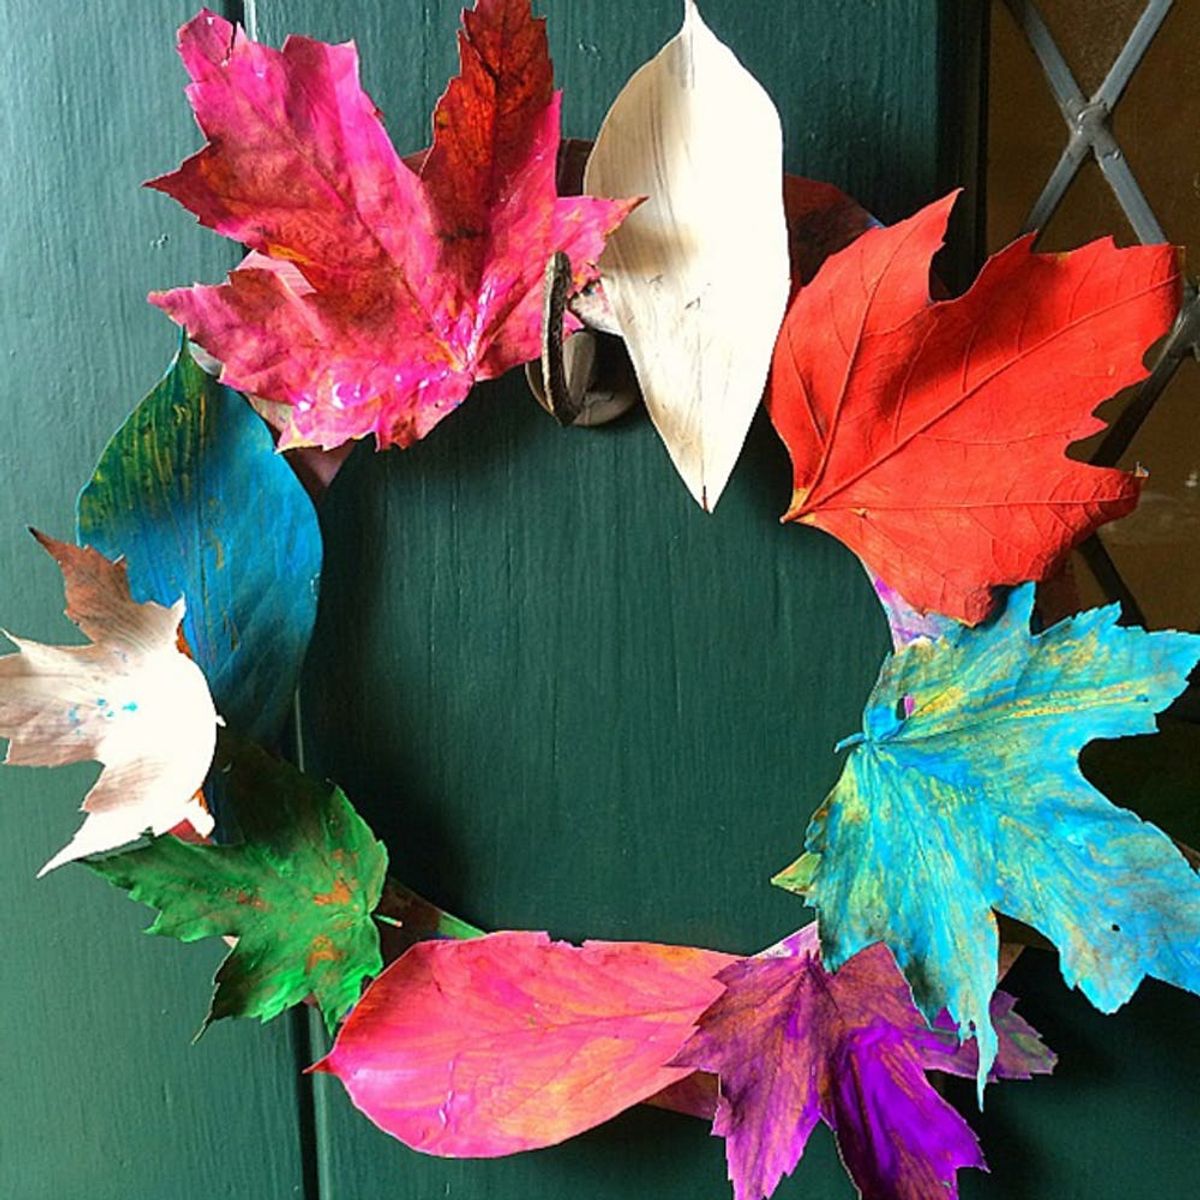 8 Fun Fall Crafts to Make Before Winter Hits